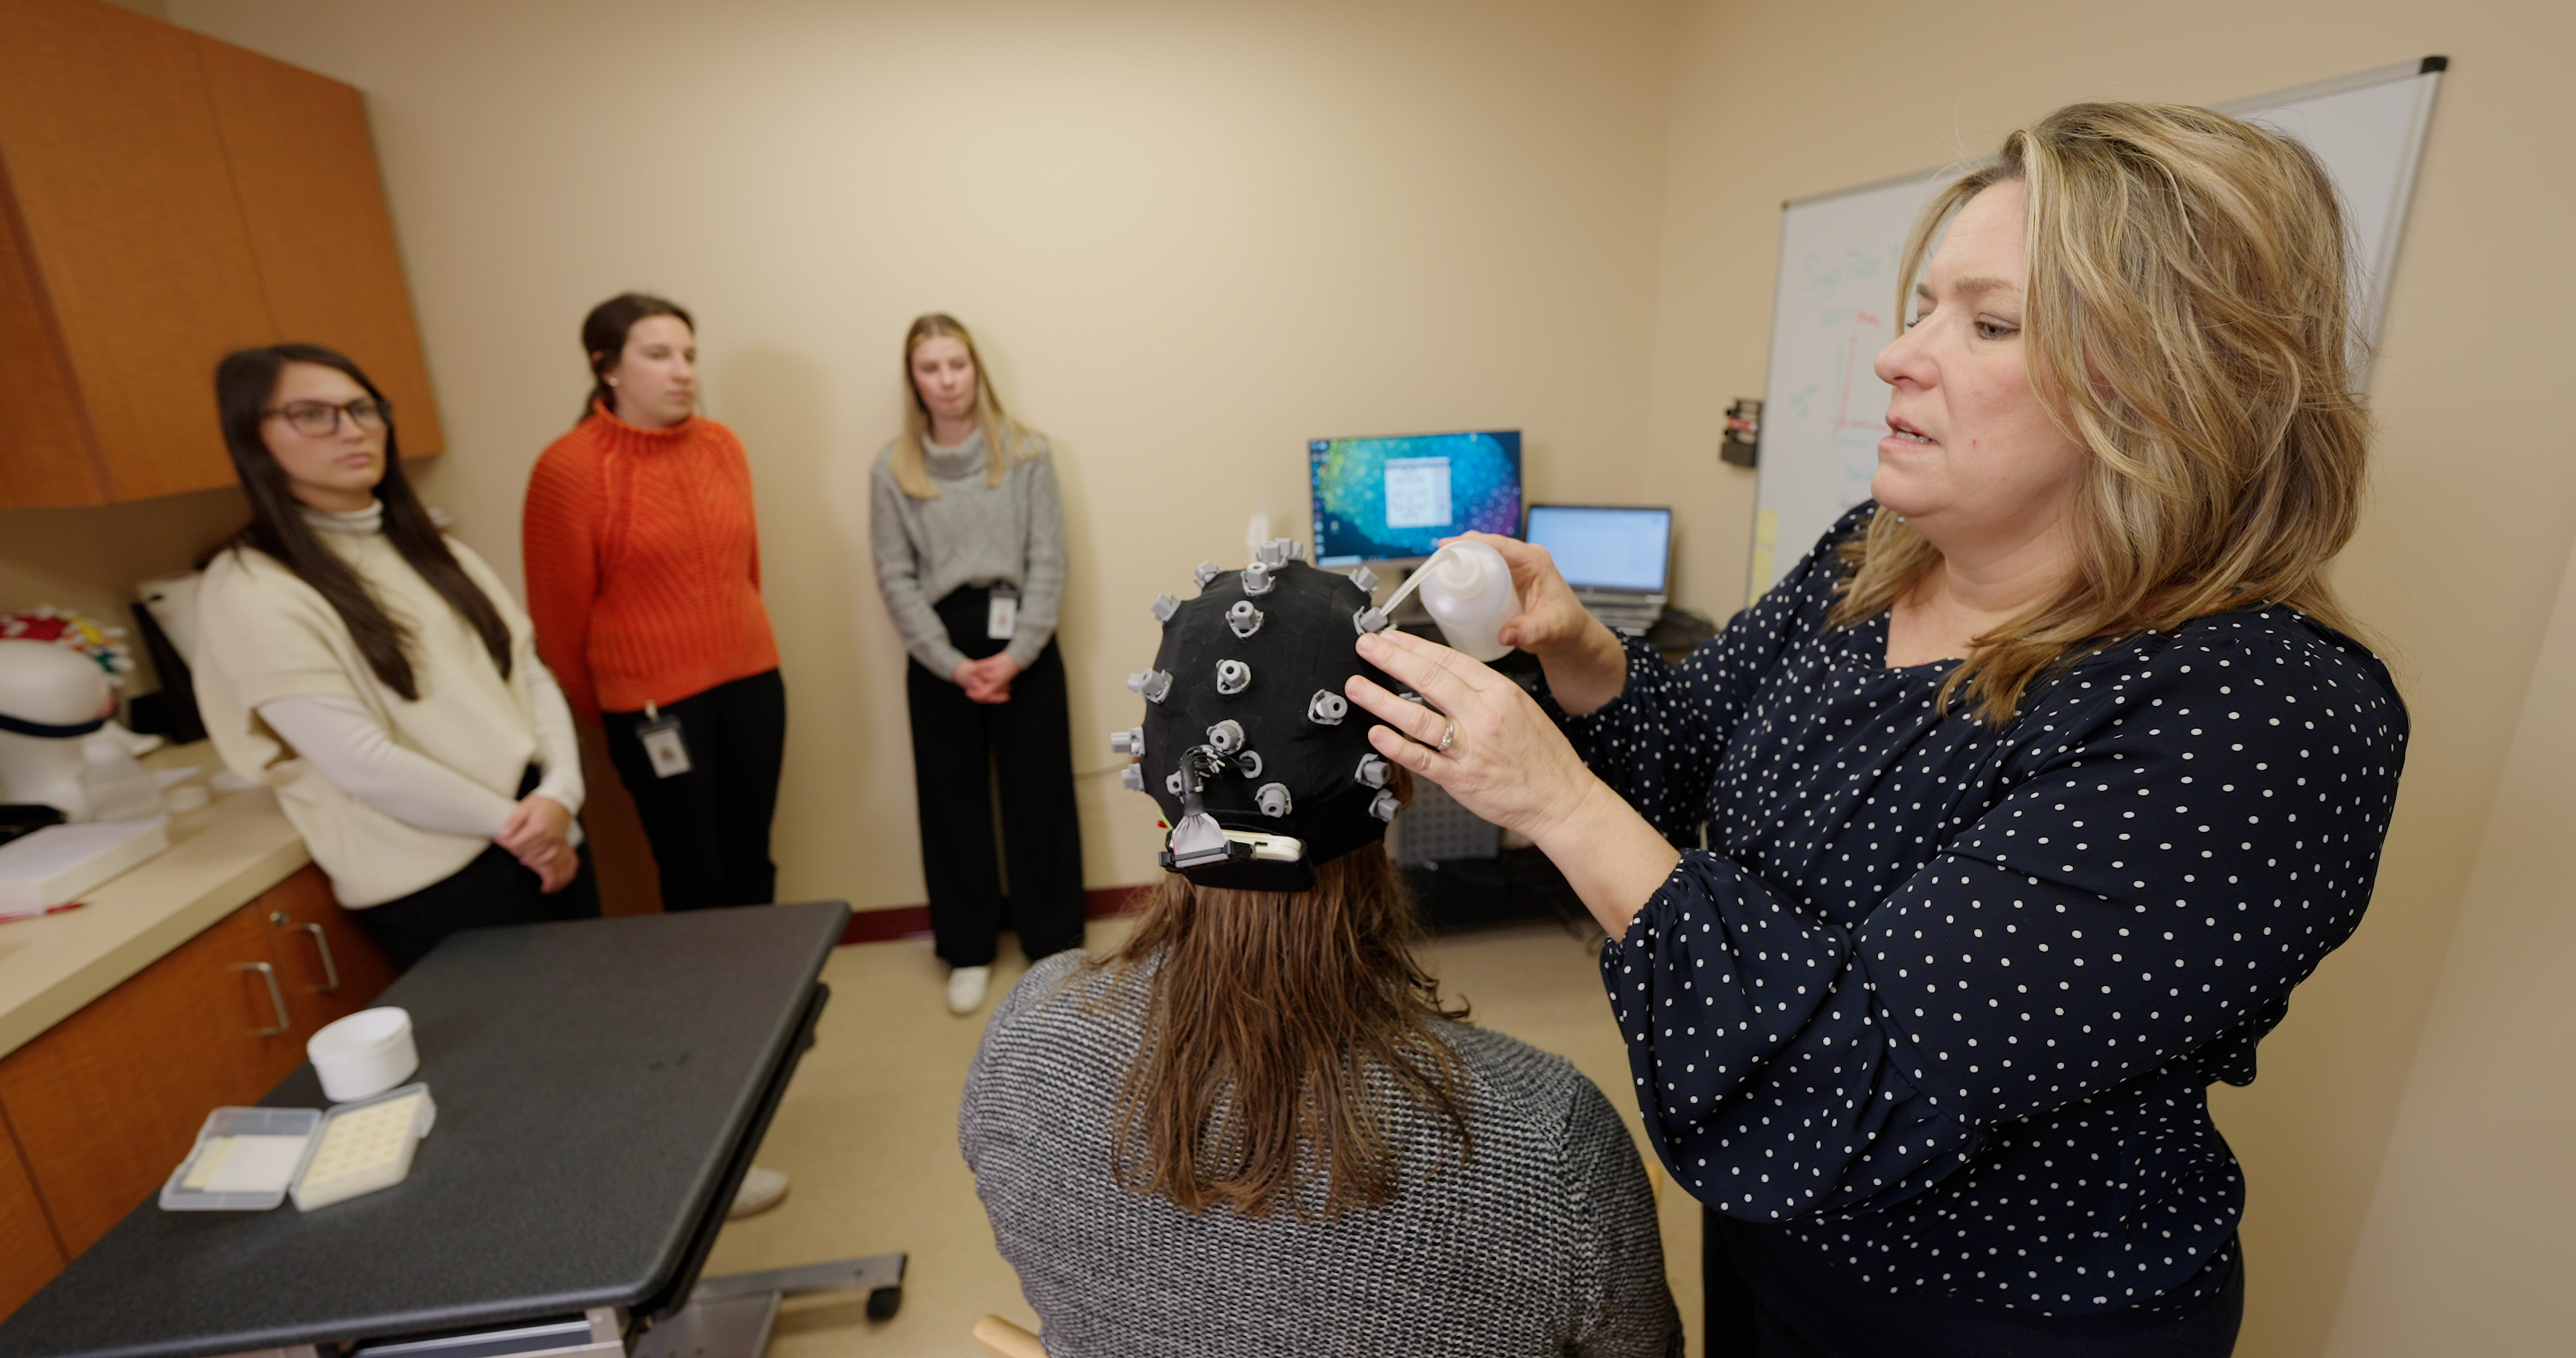 Sharyl Samargia-Grivette in her lab with students demonstrating neuro research